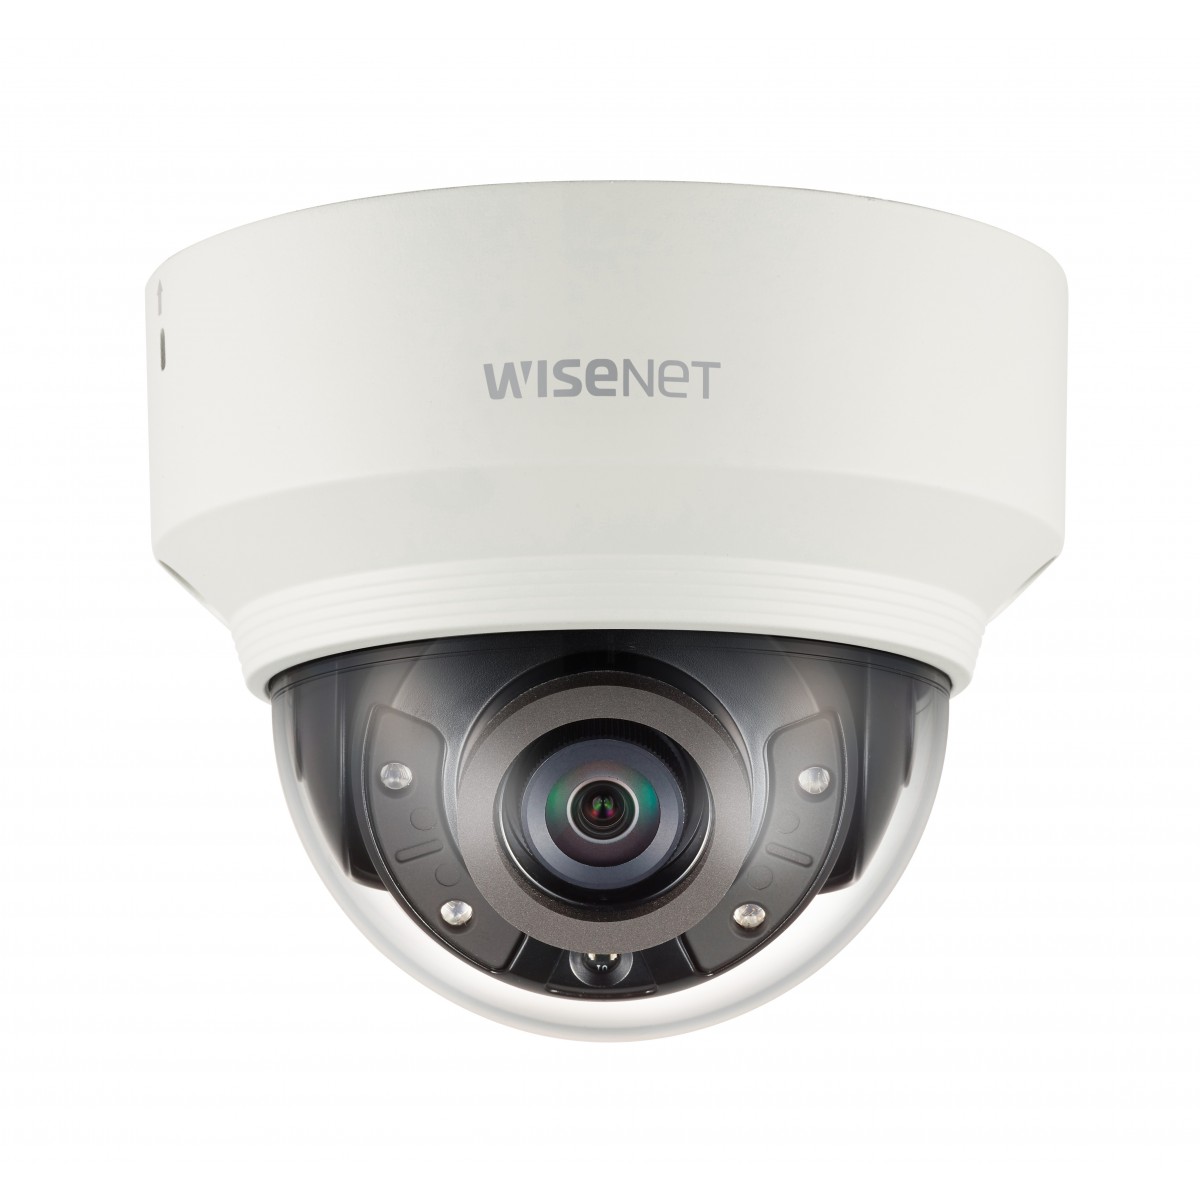 Hanwha Techwin Hanwha XND-6020R - IP security camera - Indoor - Wired - Digital PTZ - Dome - Ceiling